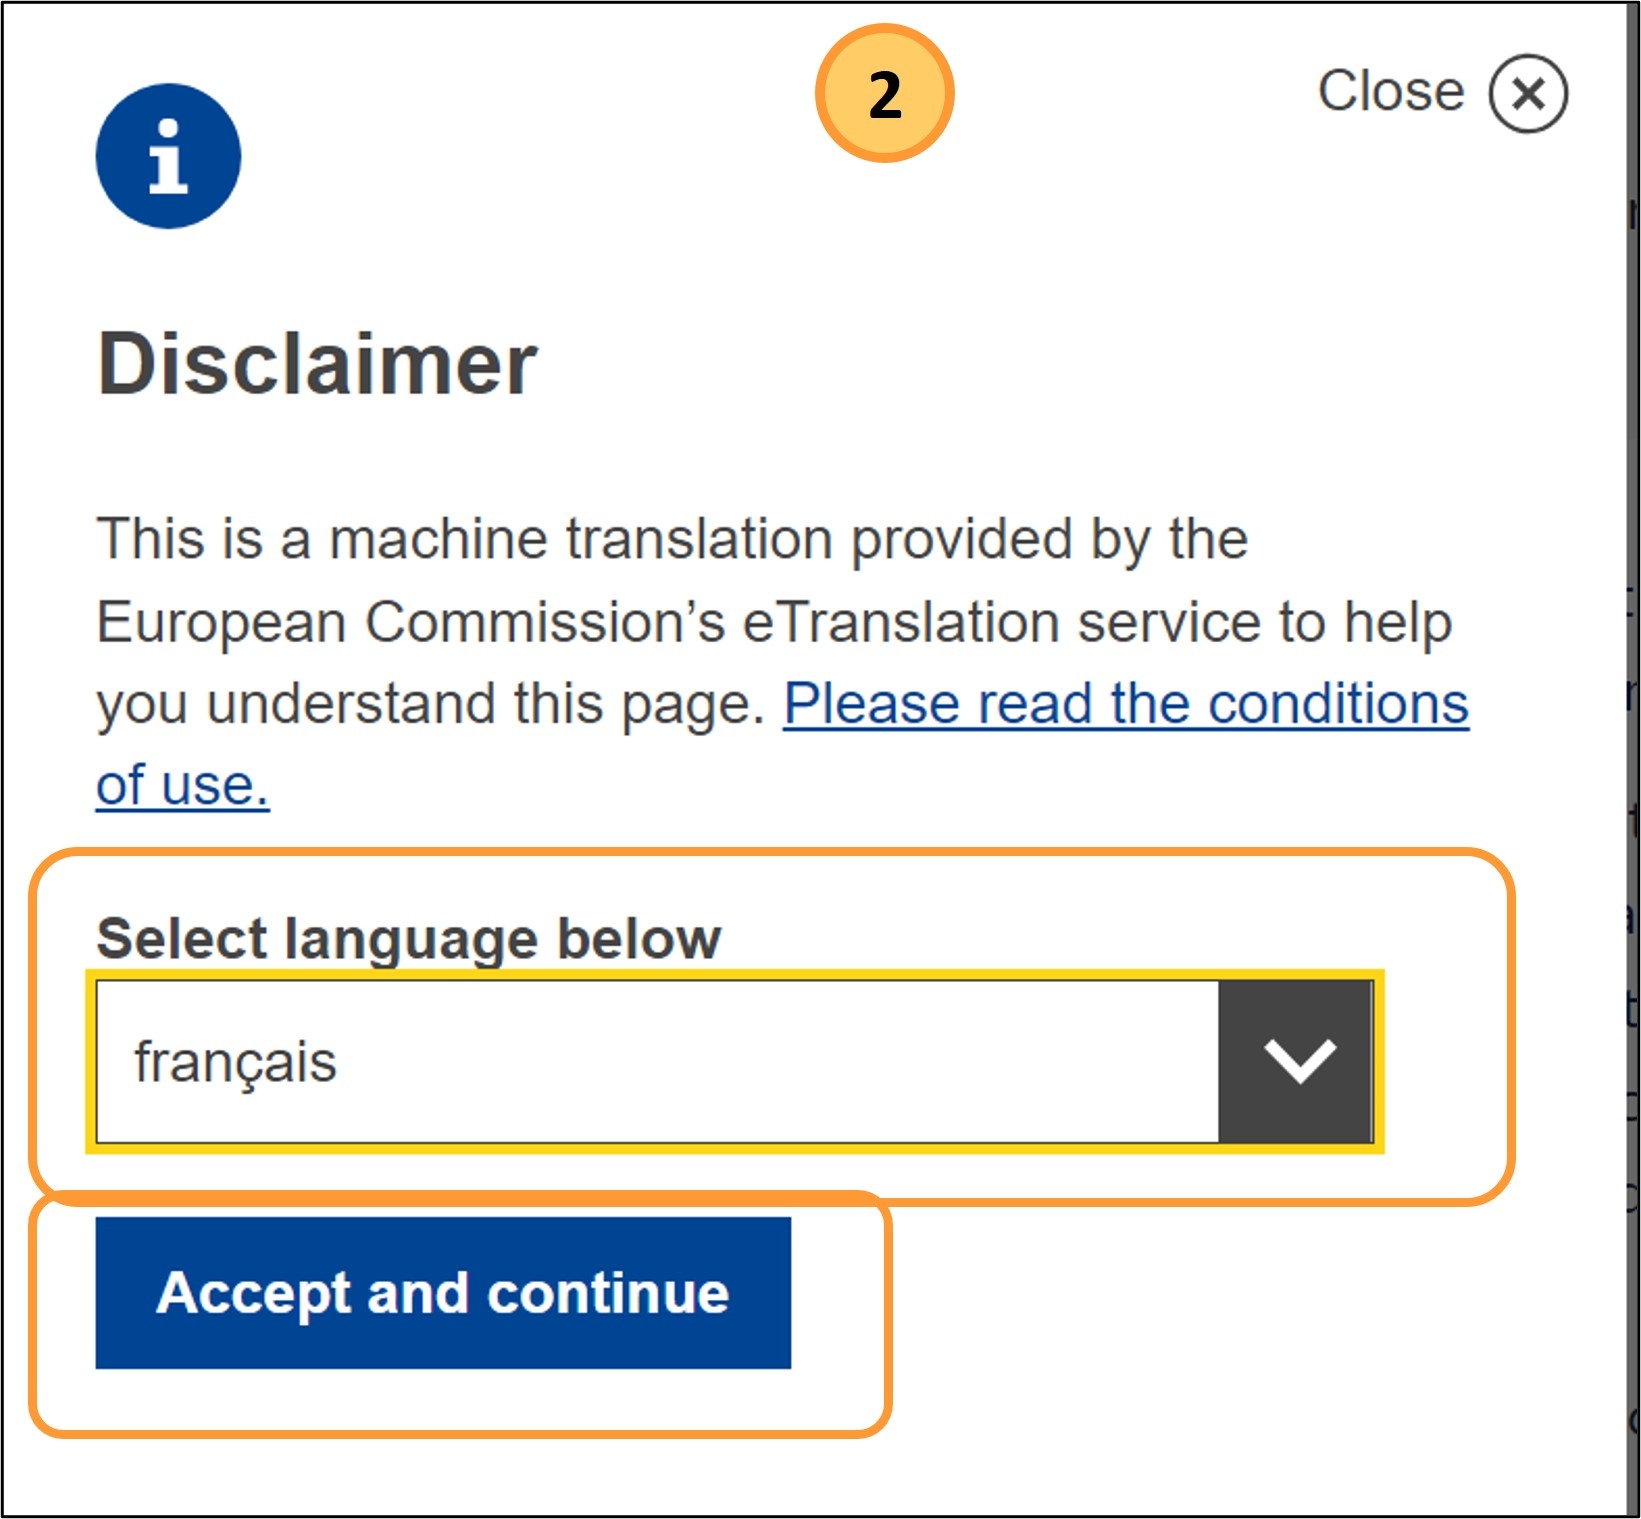 Select target language and click Accept and continue